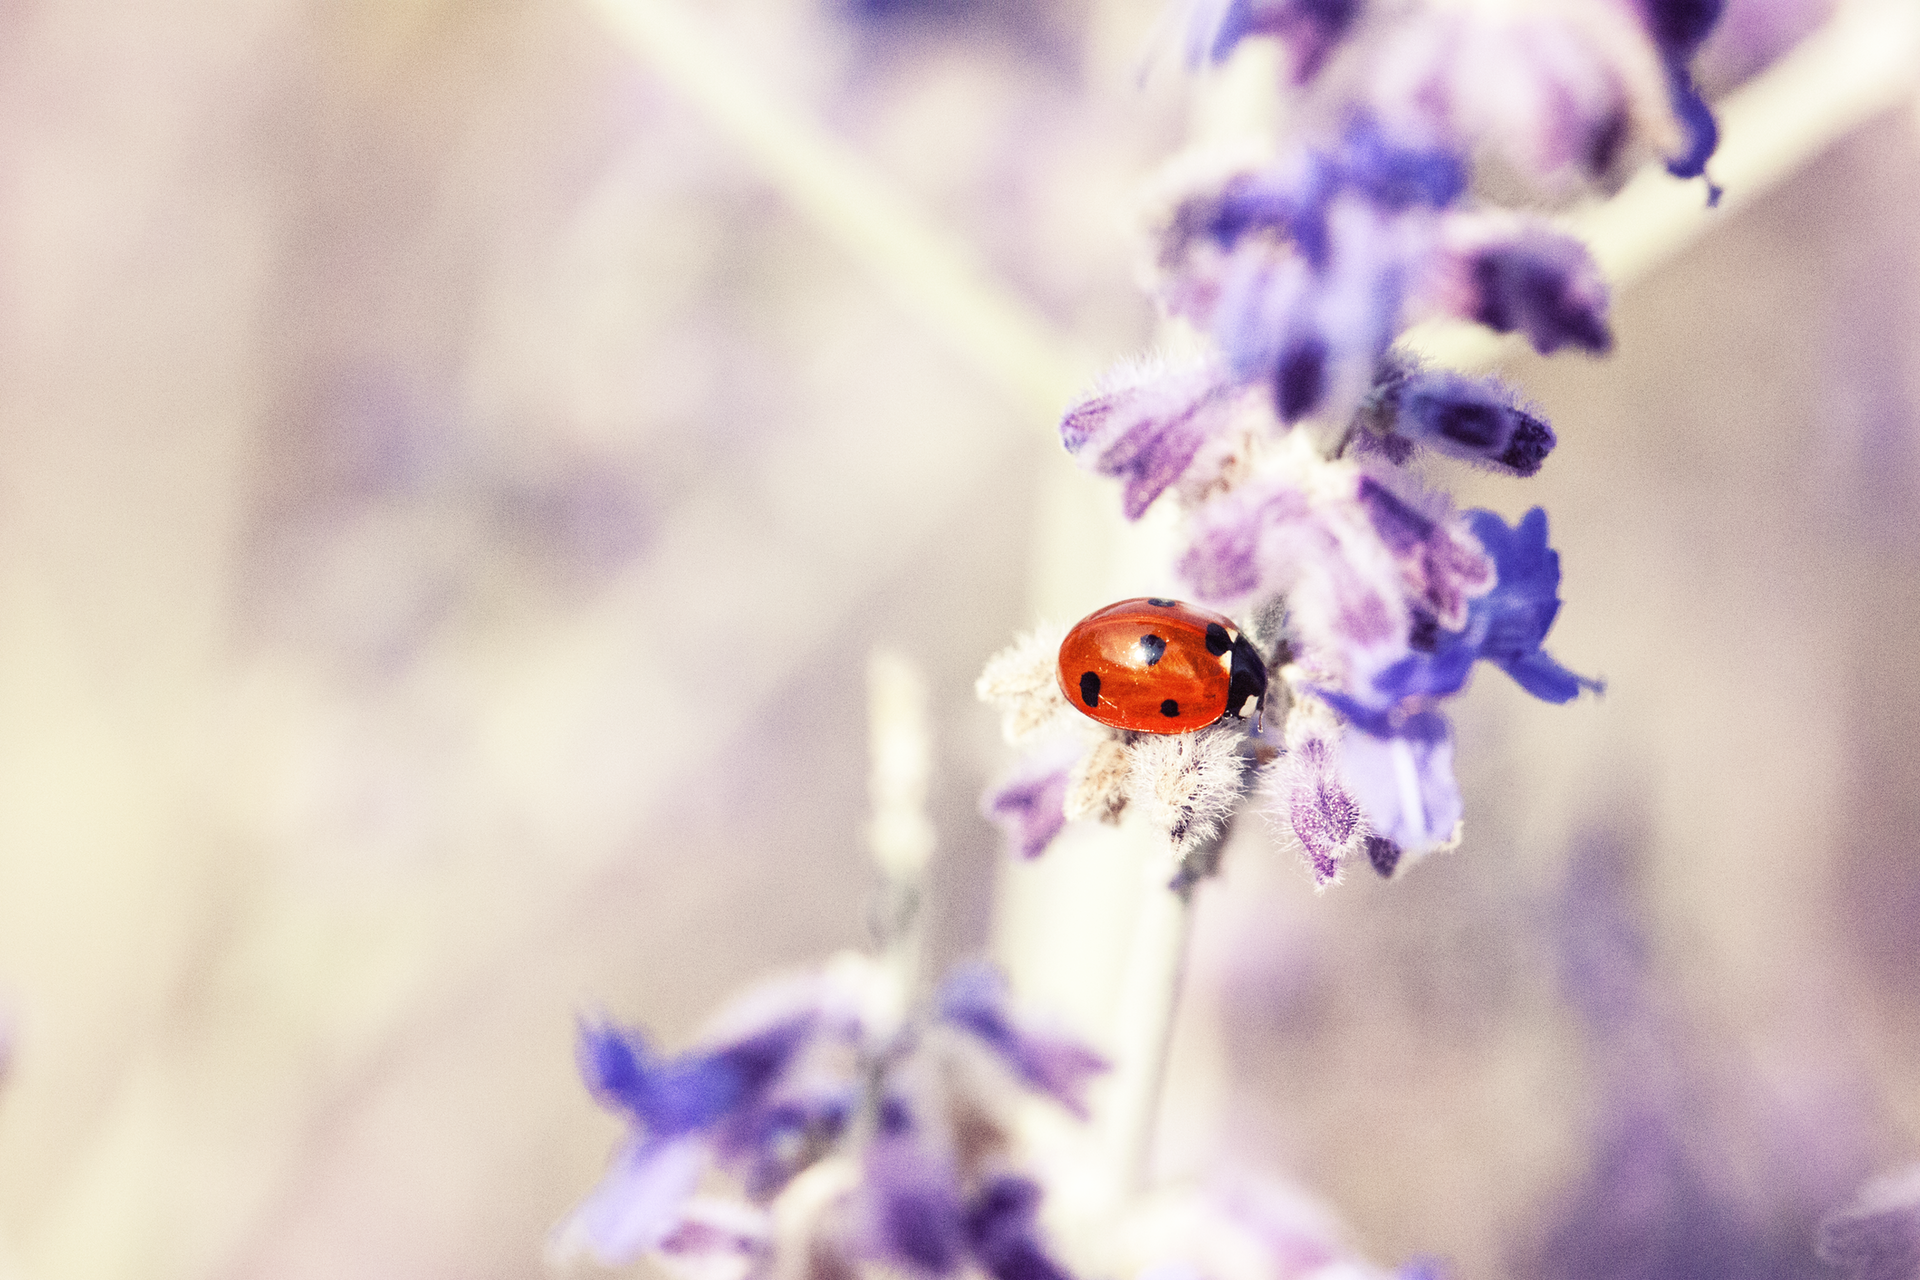 Be on the Lookout for This Dangerous Ladybug